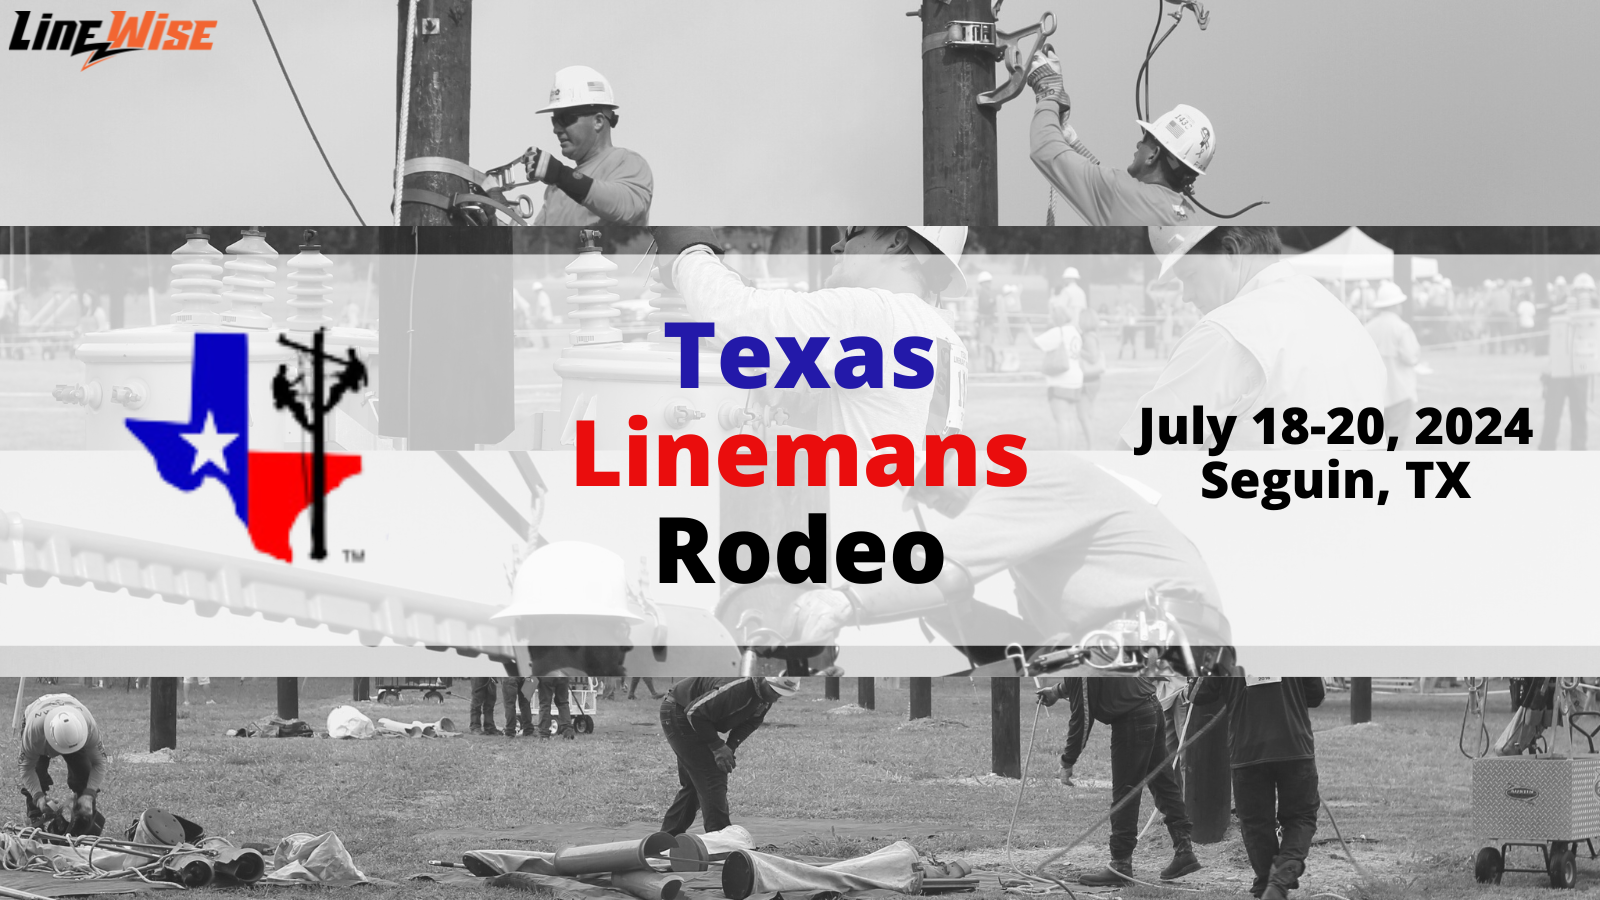 Texas Lineman's Rodeo 2024 LineWise